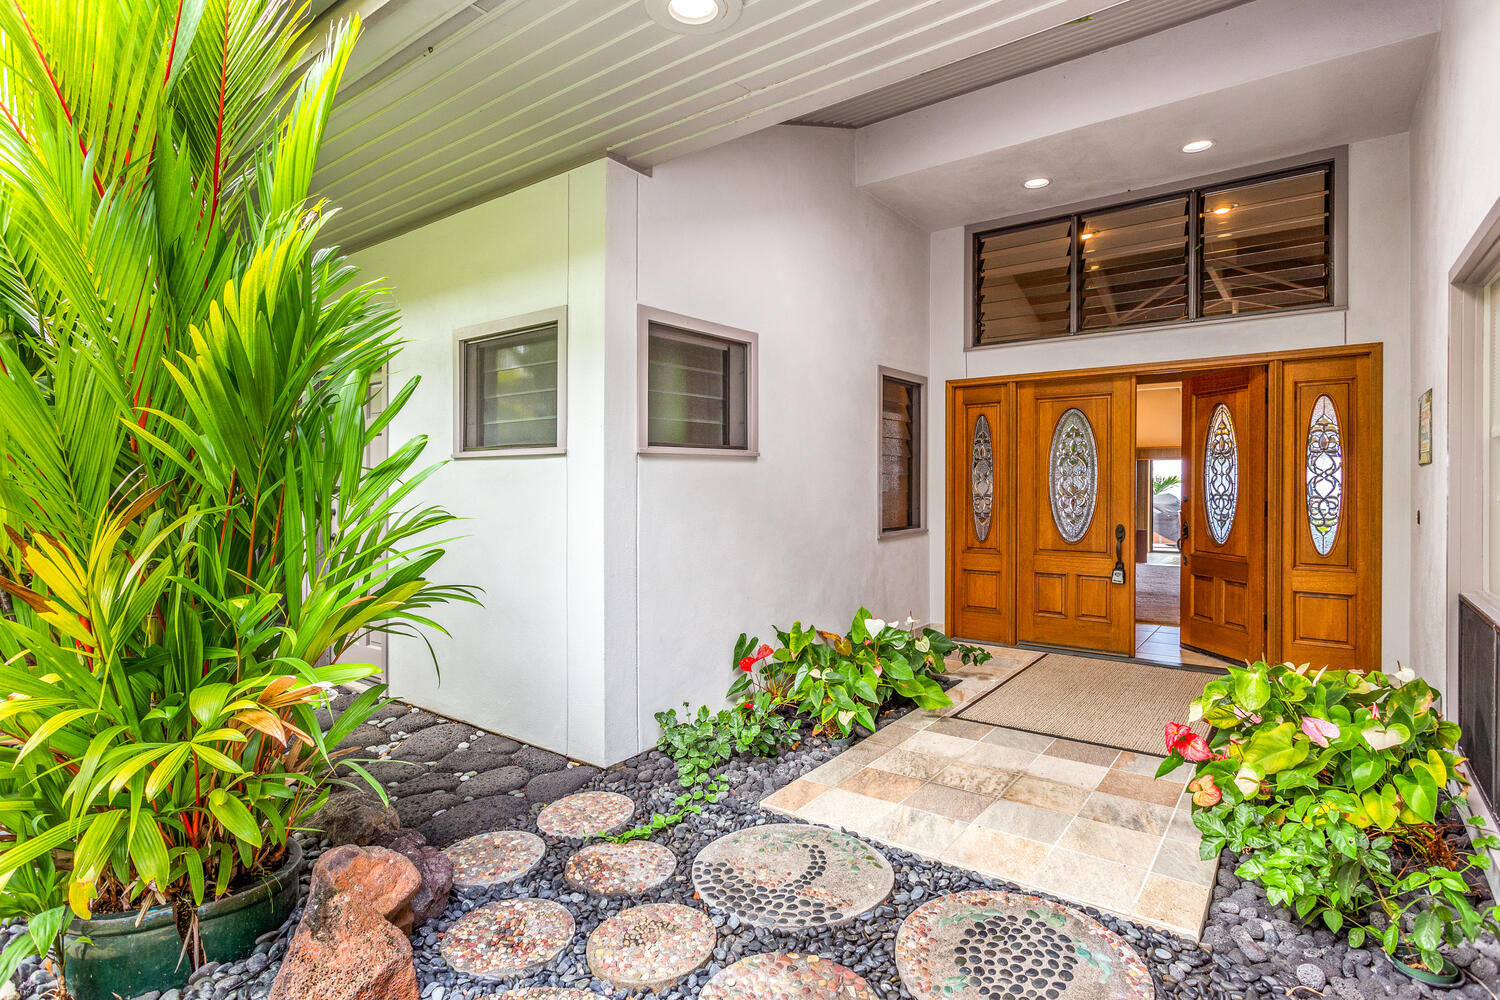 Native Hawaiian plants and flowers surround the entry.